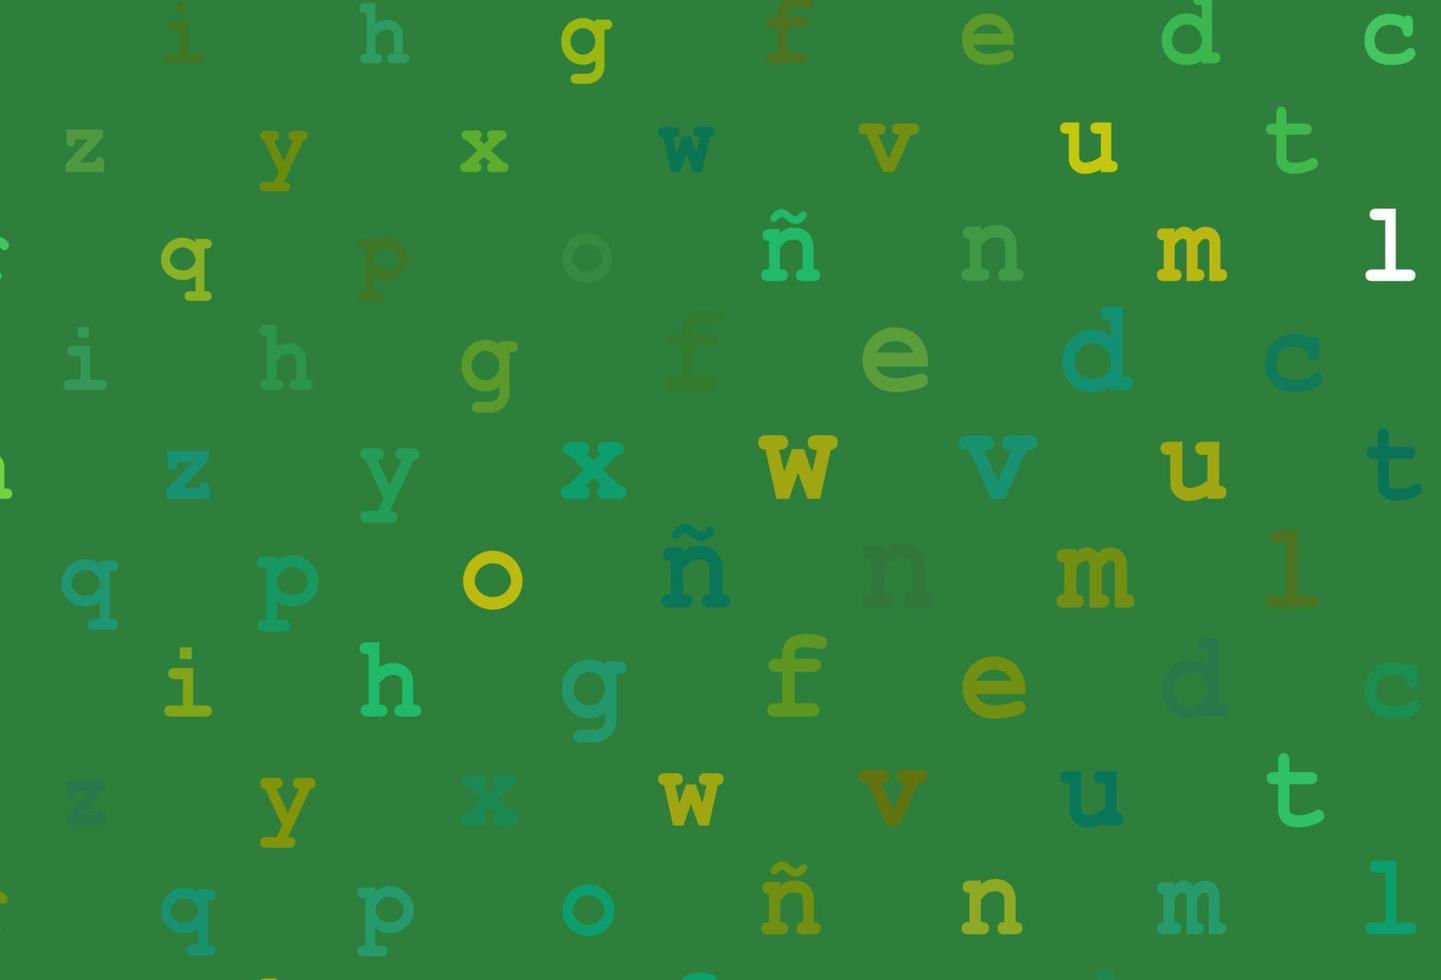 Light green, yellow vector pattern with ABC symbols.